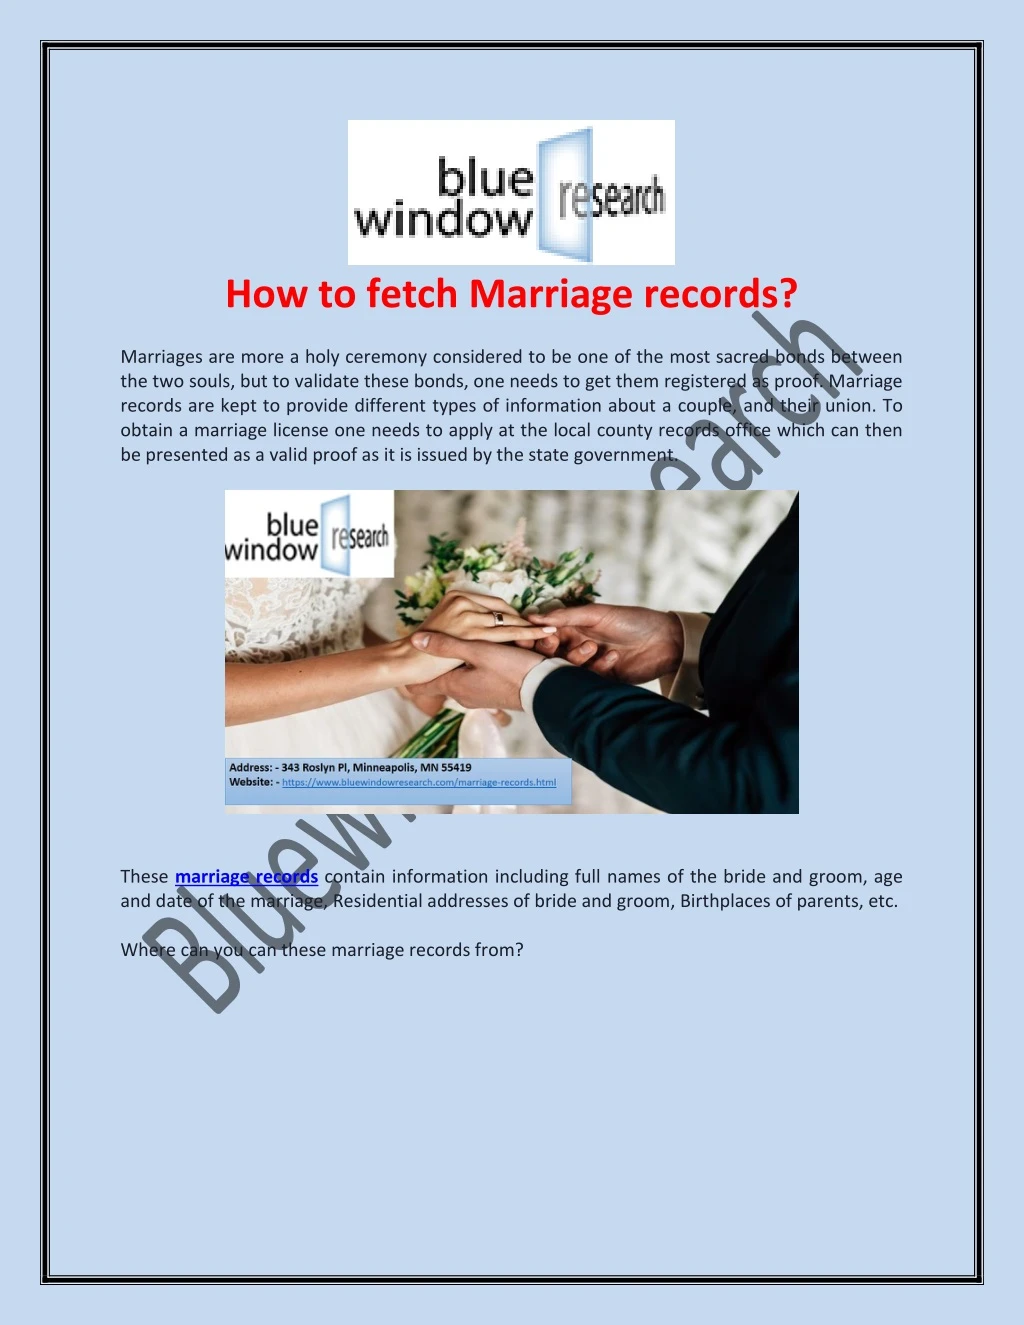 how to fetch marriage records